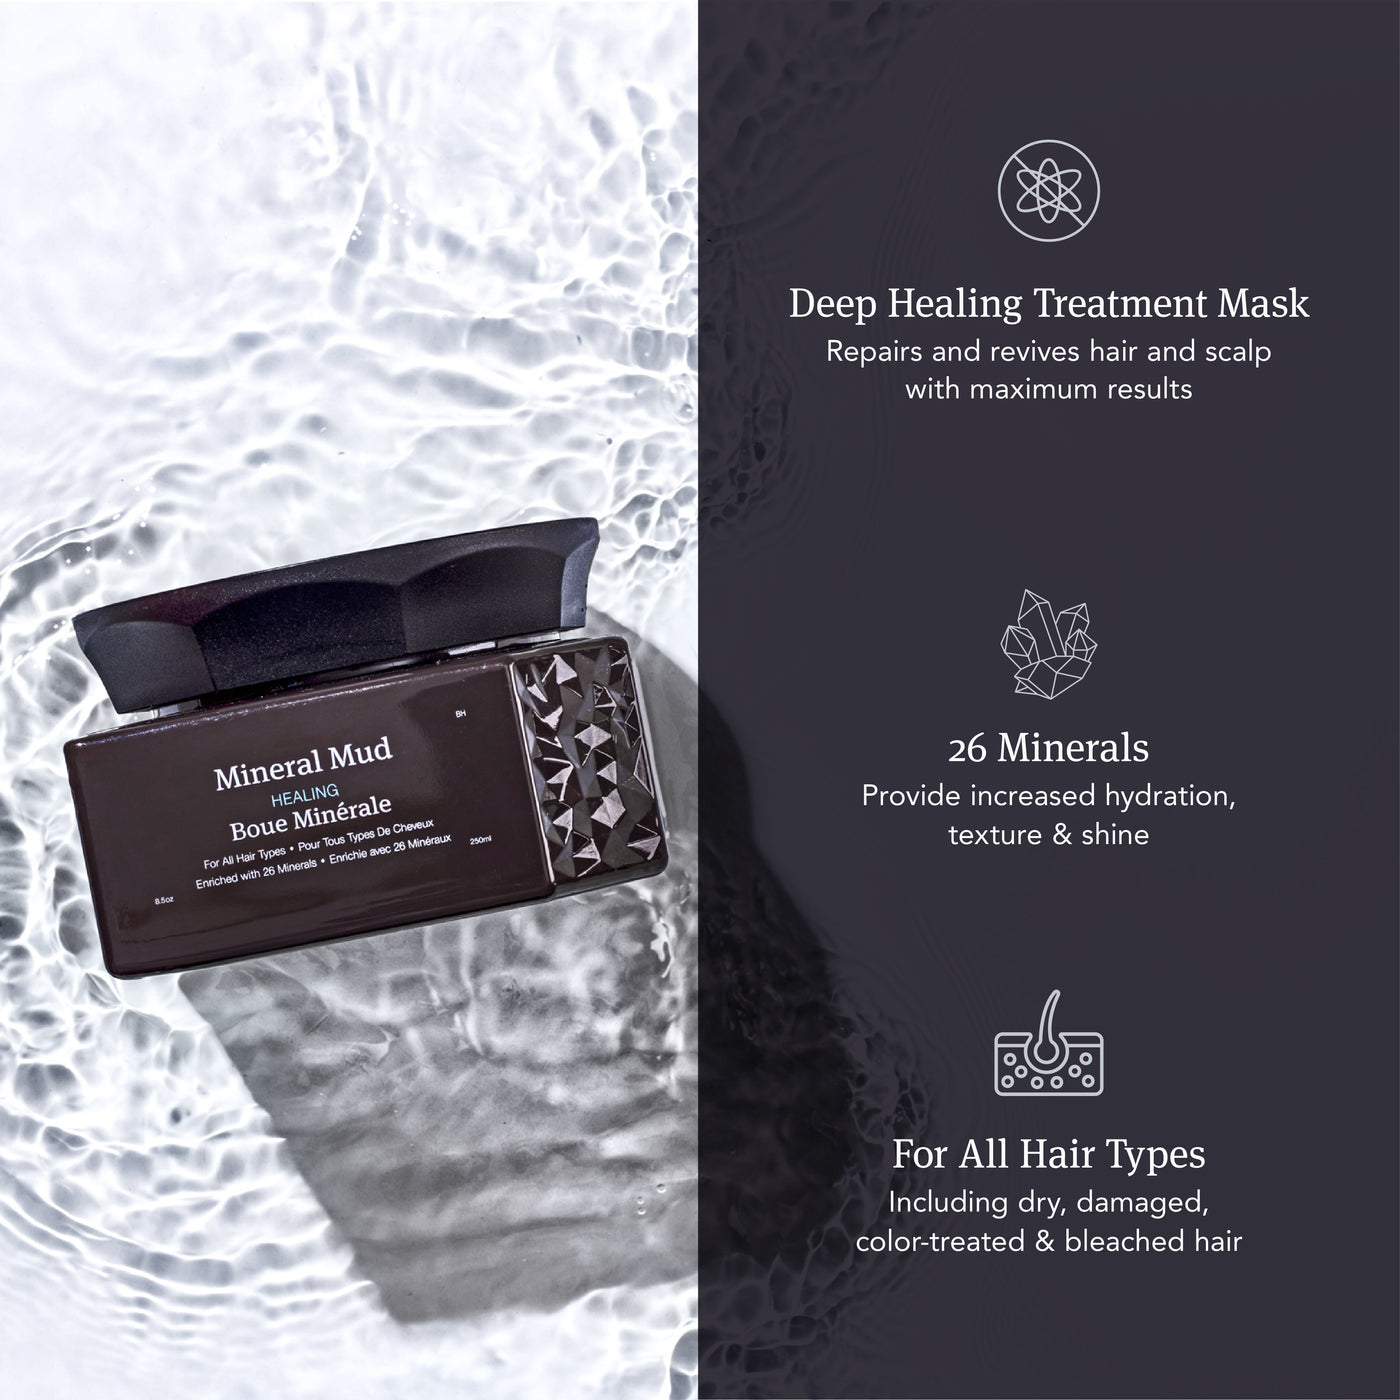 Saphira's deep conditioning treatment mask for dry and damaged hair